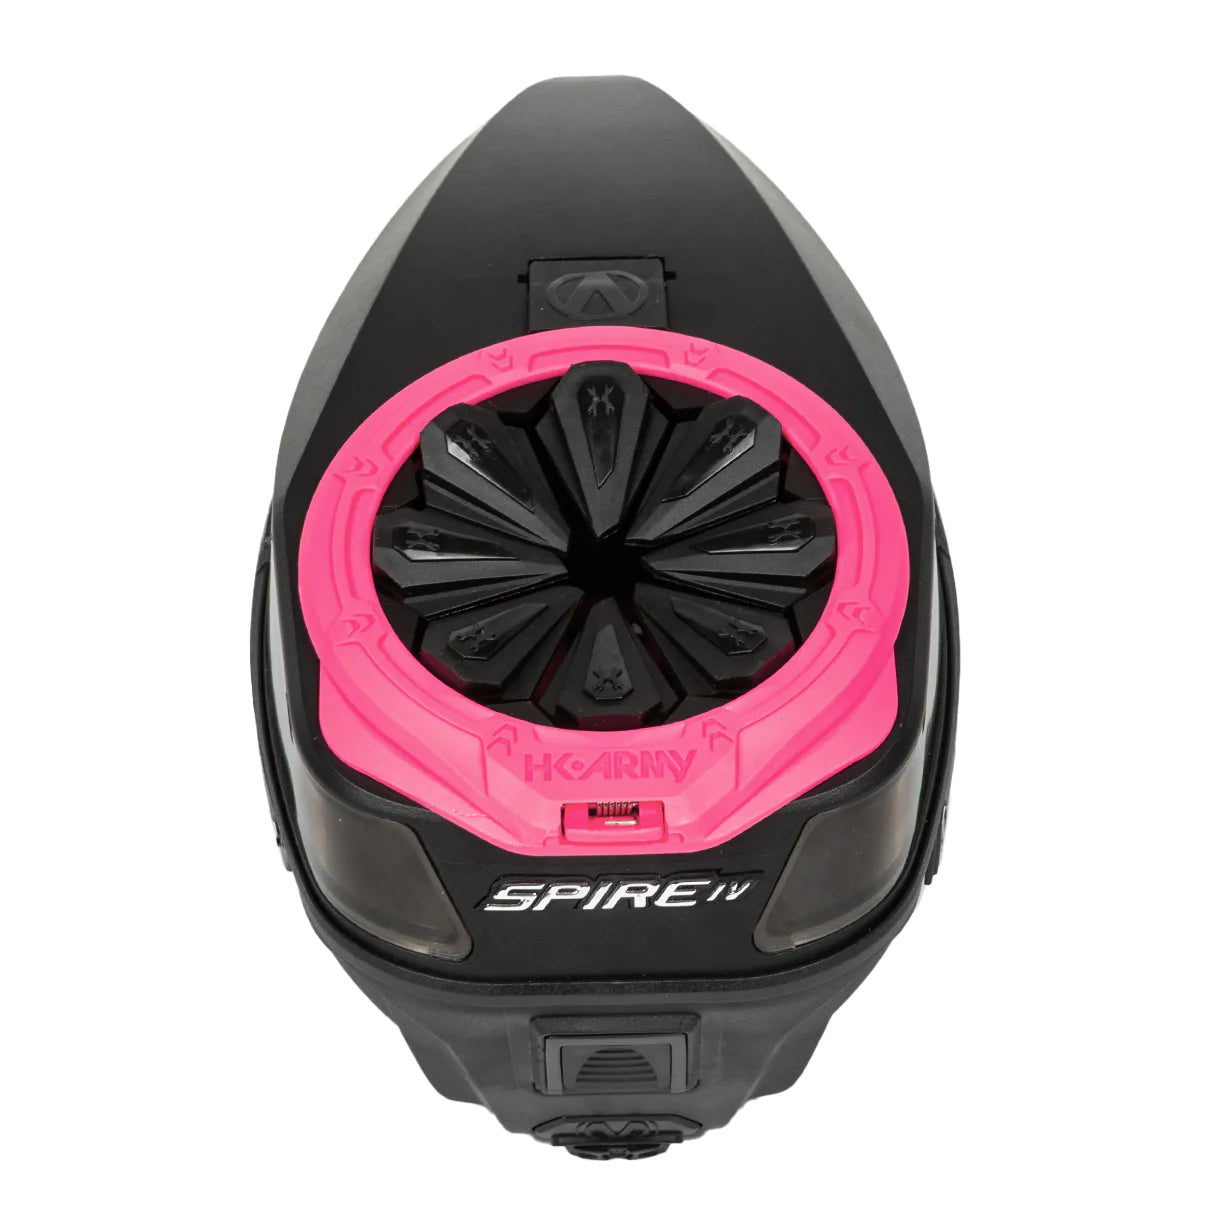 Epic Speed Feed - Pro | Color: Neon Pink | HK Army